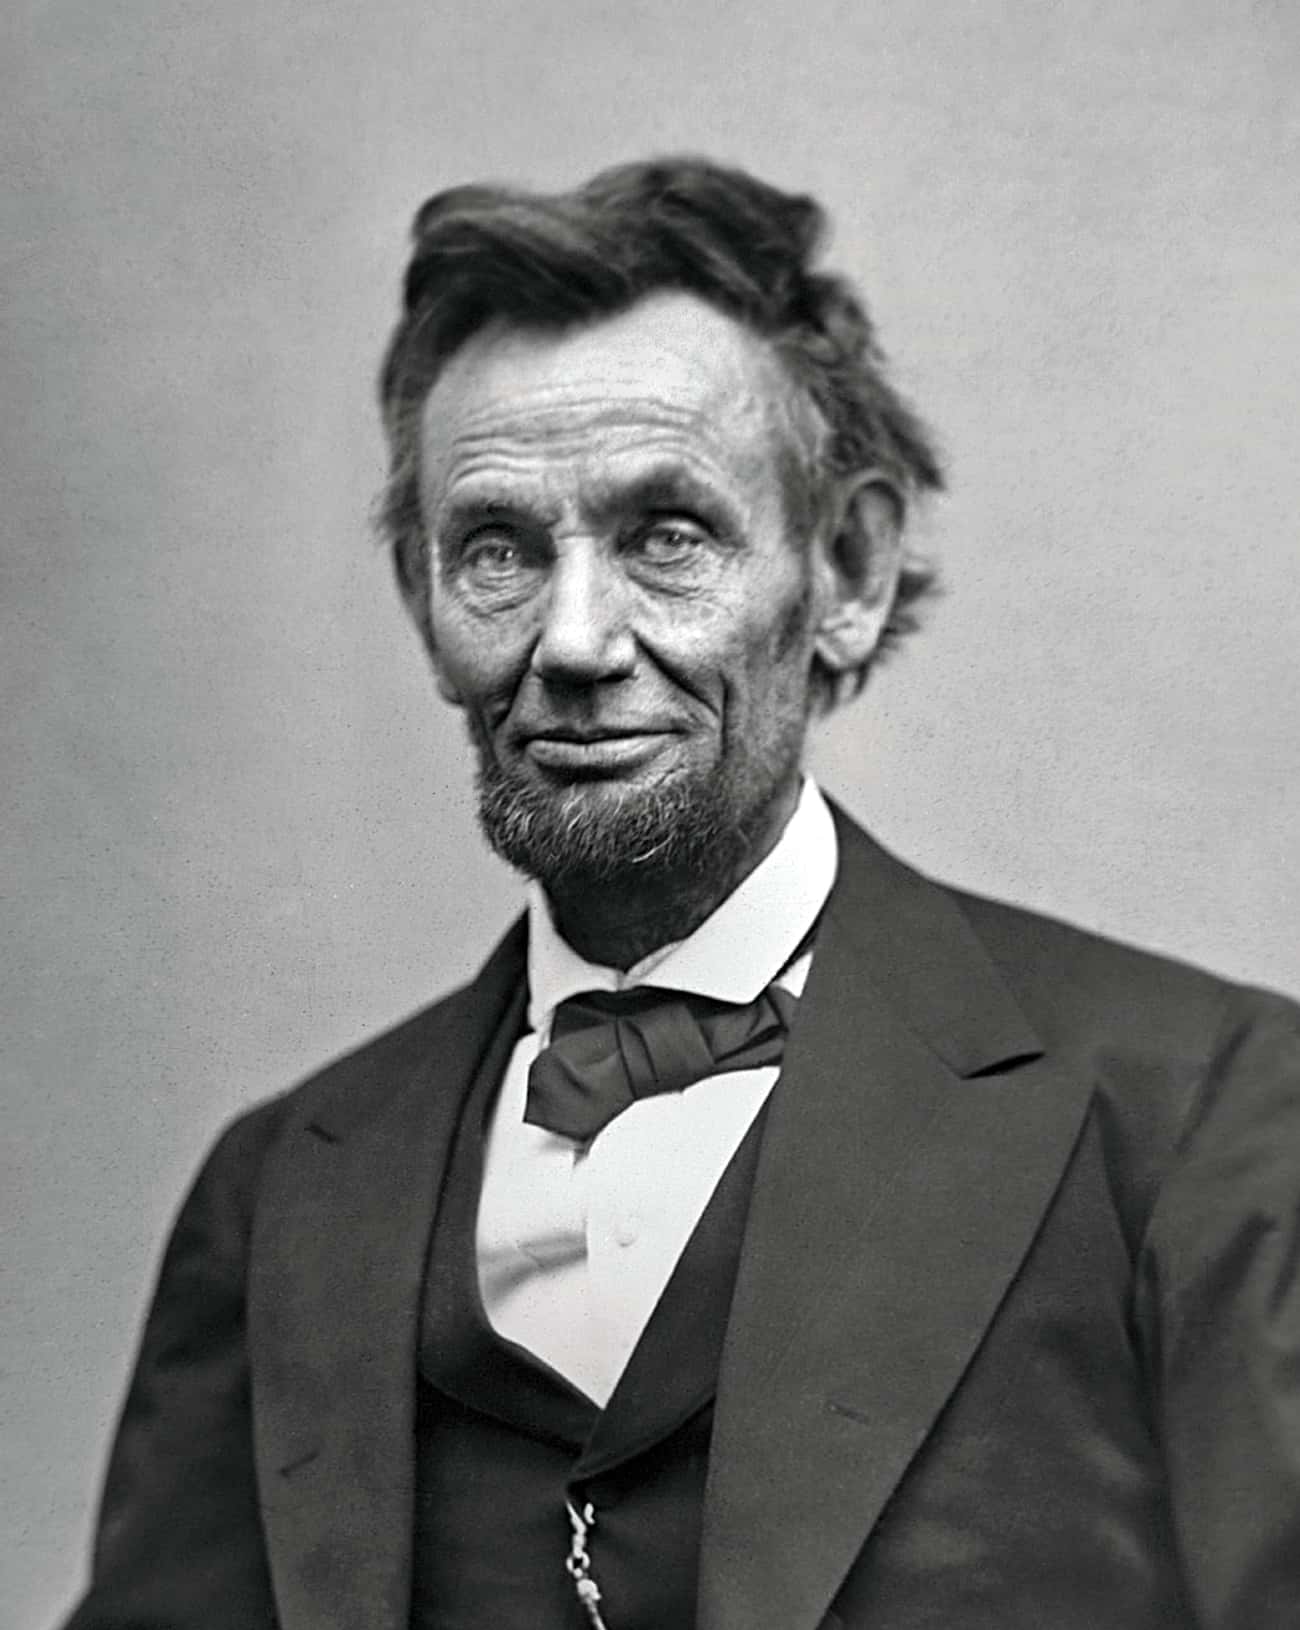 Abraham Lincoln Saw Two Faces In The Mirror